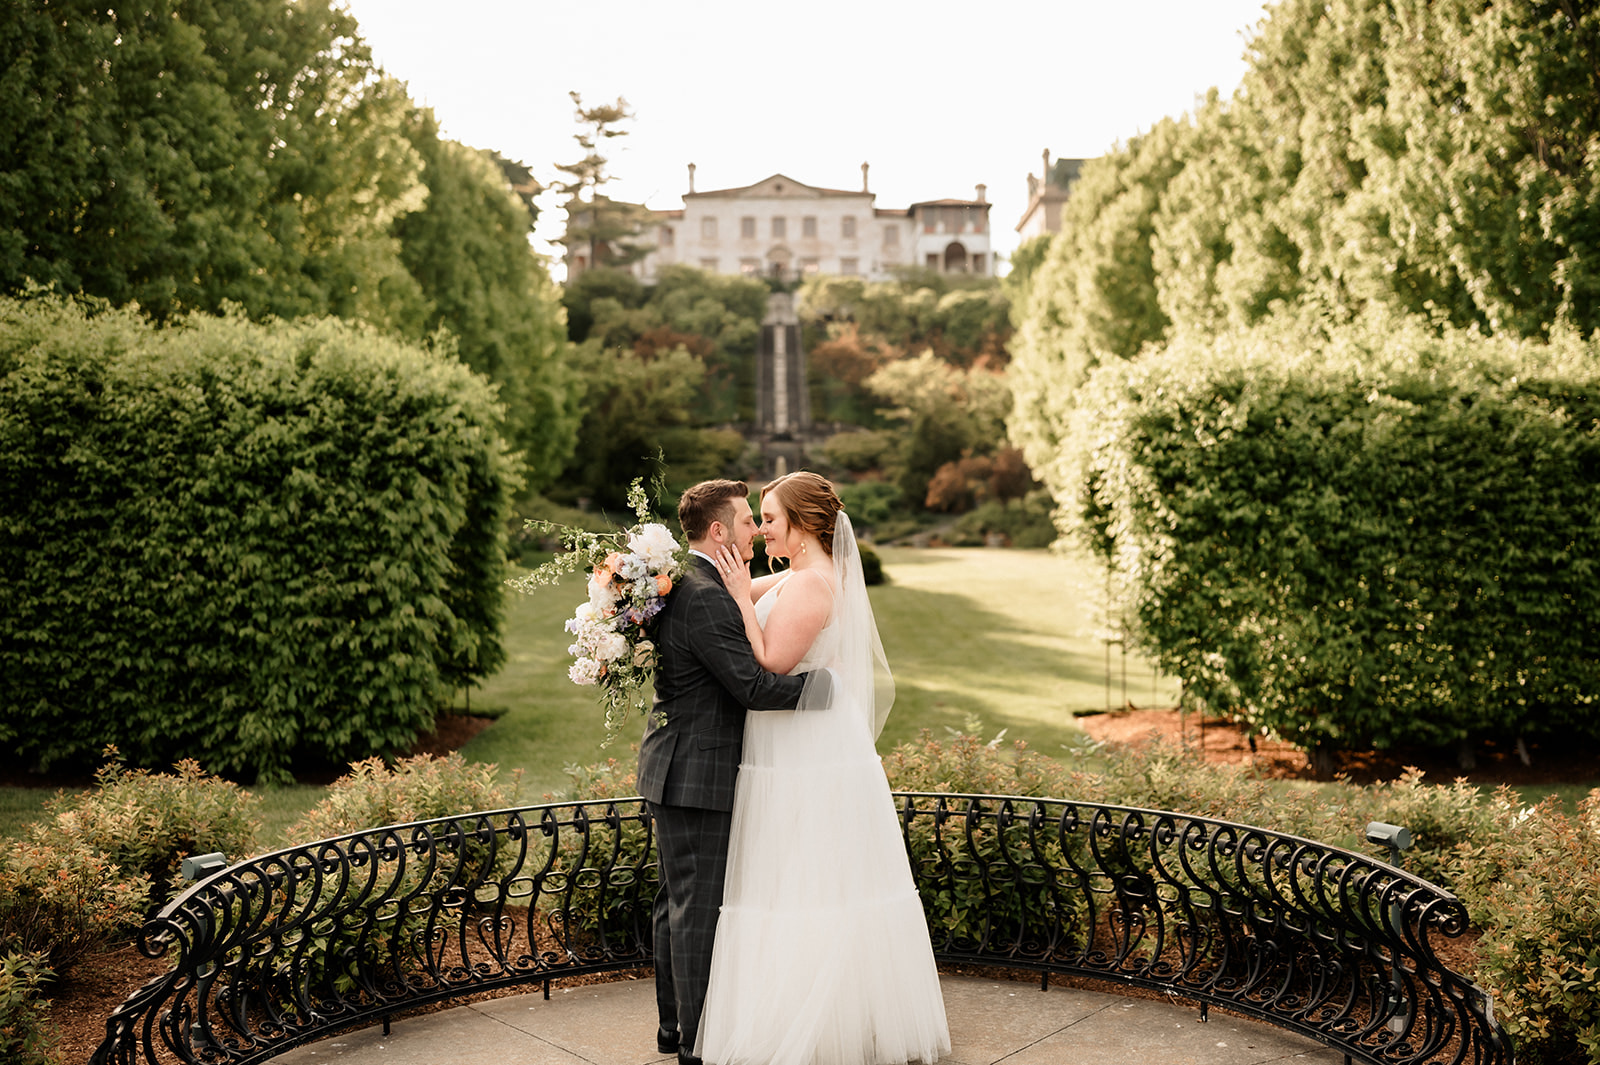 Couple who got married at Villa Terrace Decorative Art museum take portraits in beautiful gardens. 